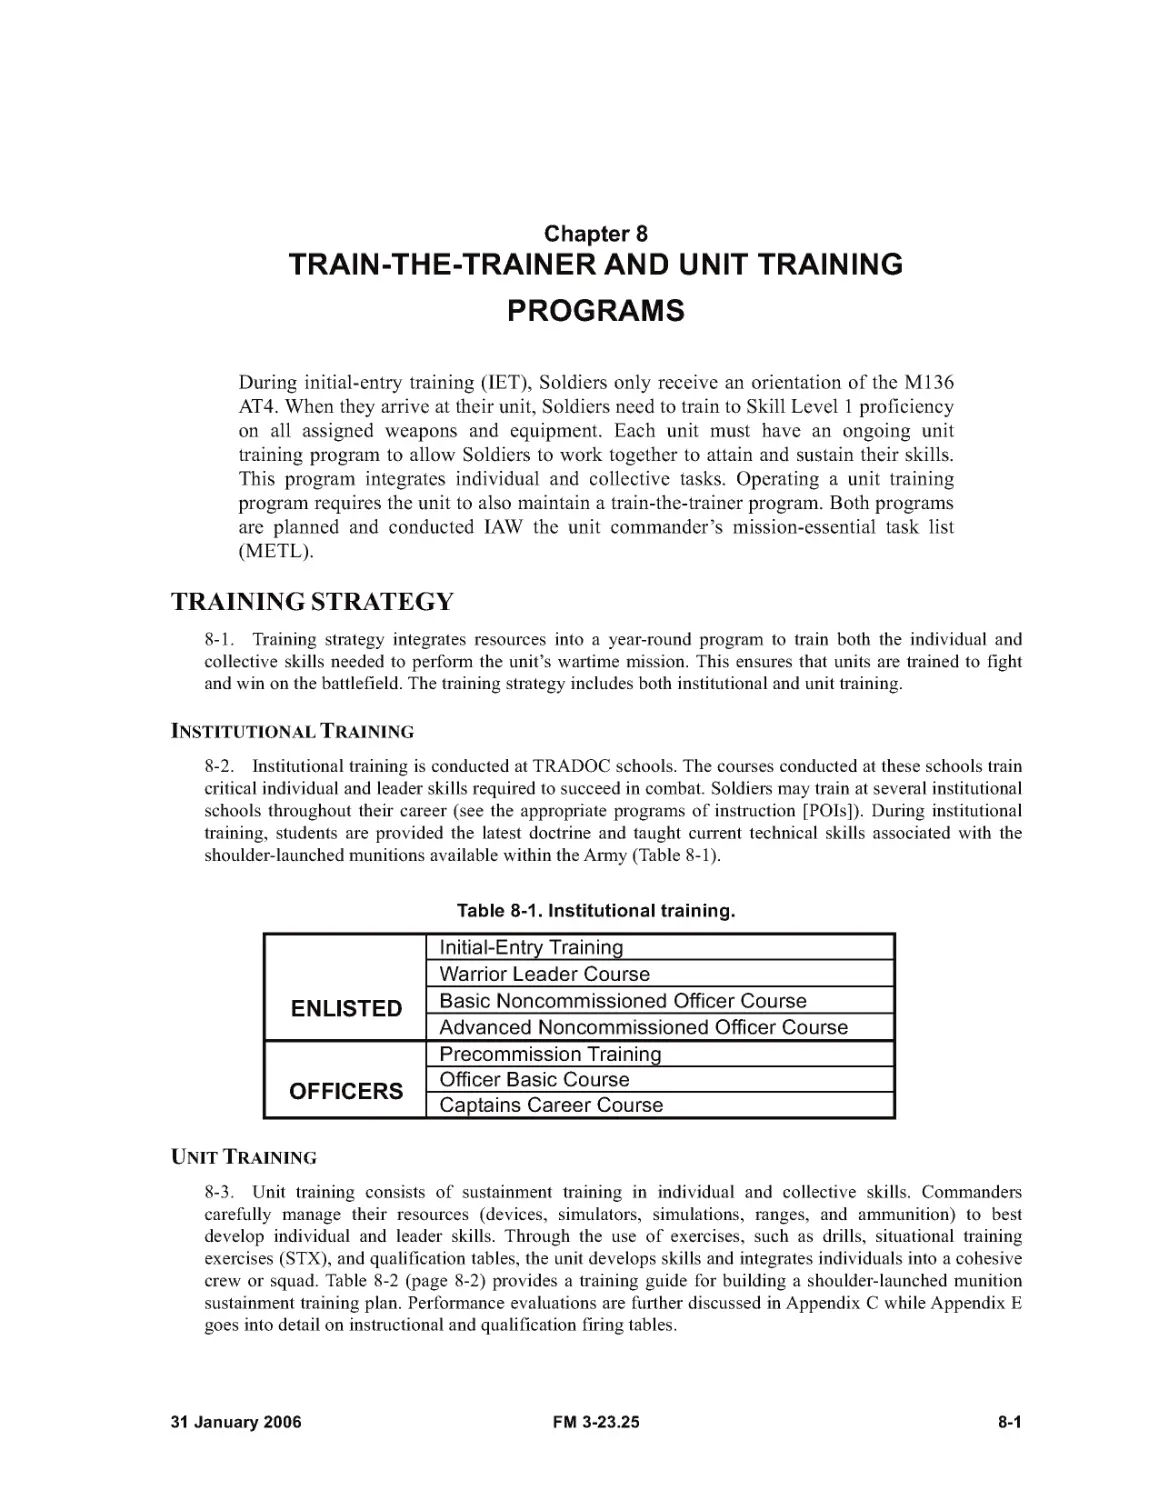 Table 8-1. Institutional training.
Chapter 8 - TRAIN-THE-TRAINER AND UNIT TRAINING PROGRAMS